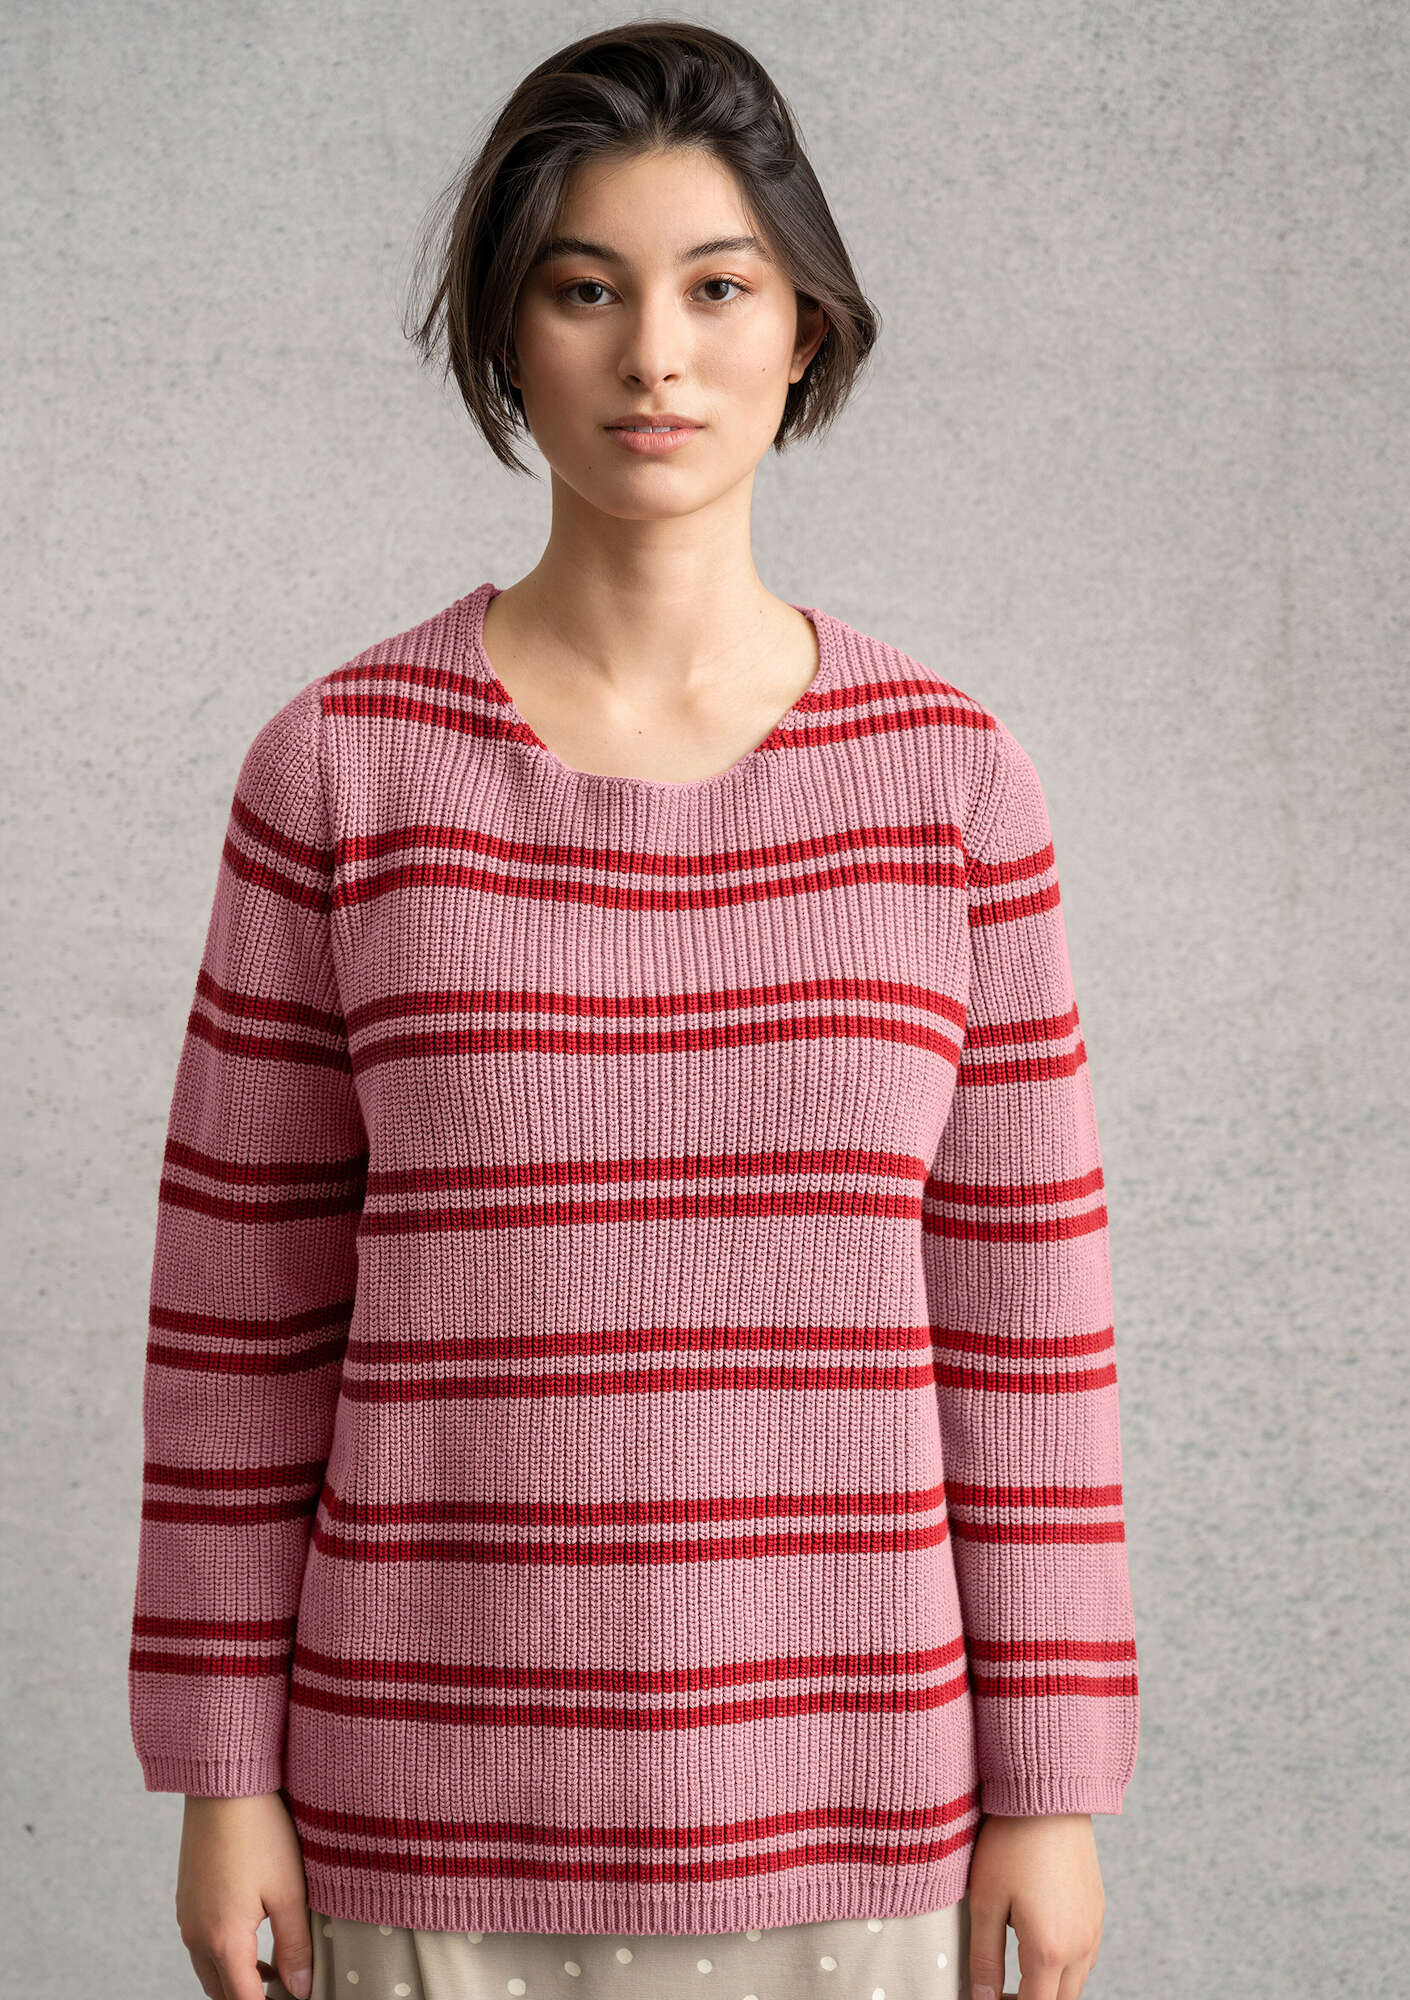 BÄSTIS sweater in recycled cotton dark lily/striped thumbnail